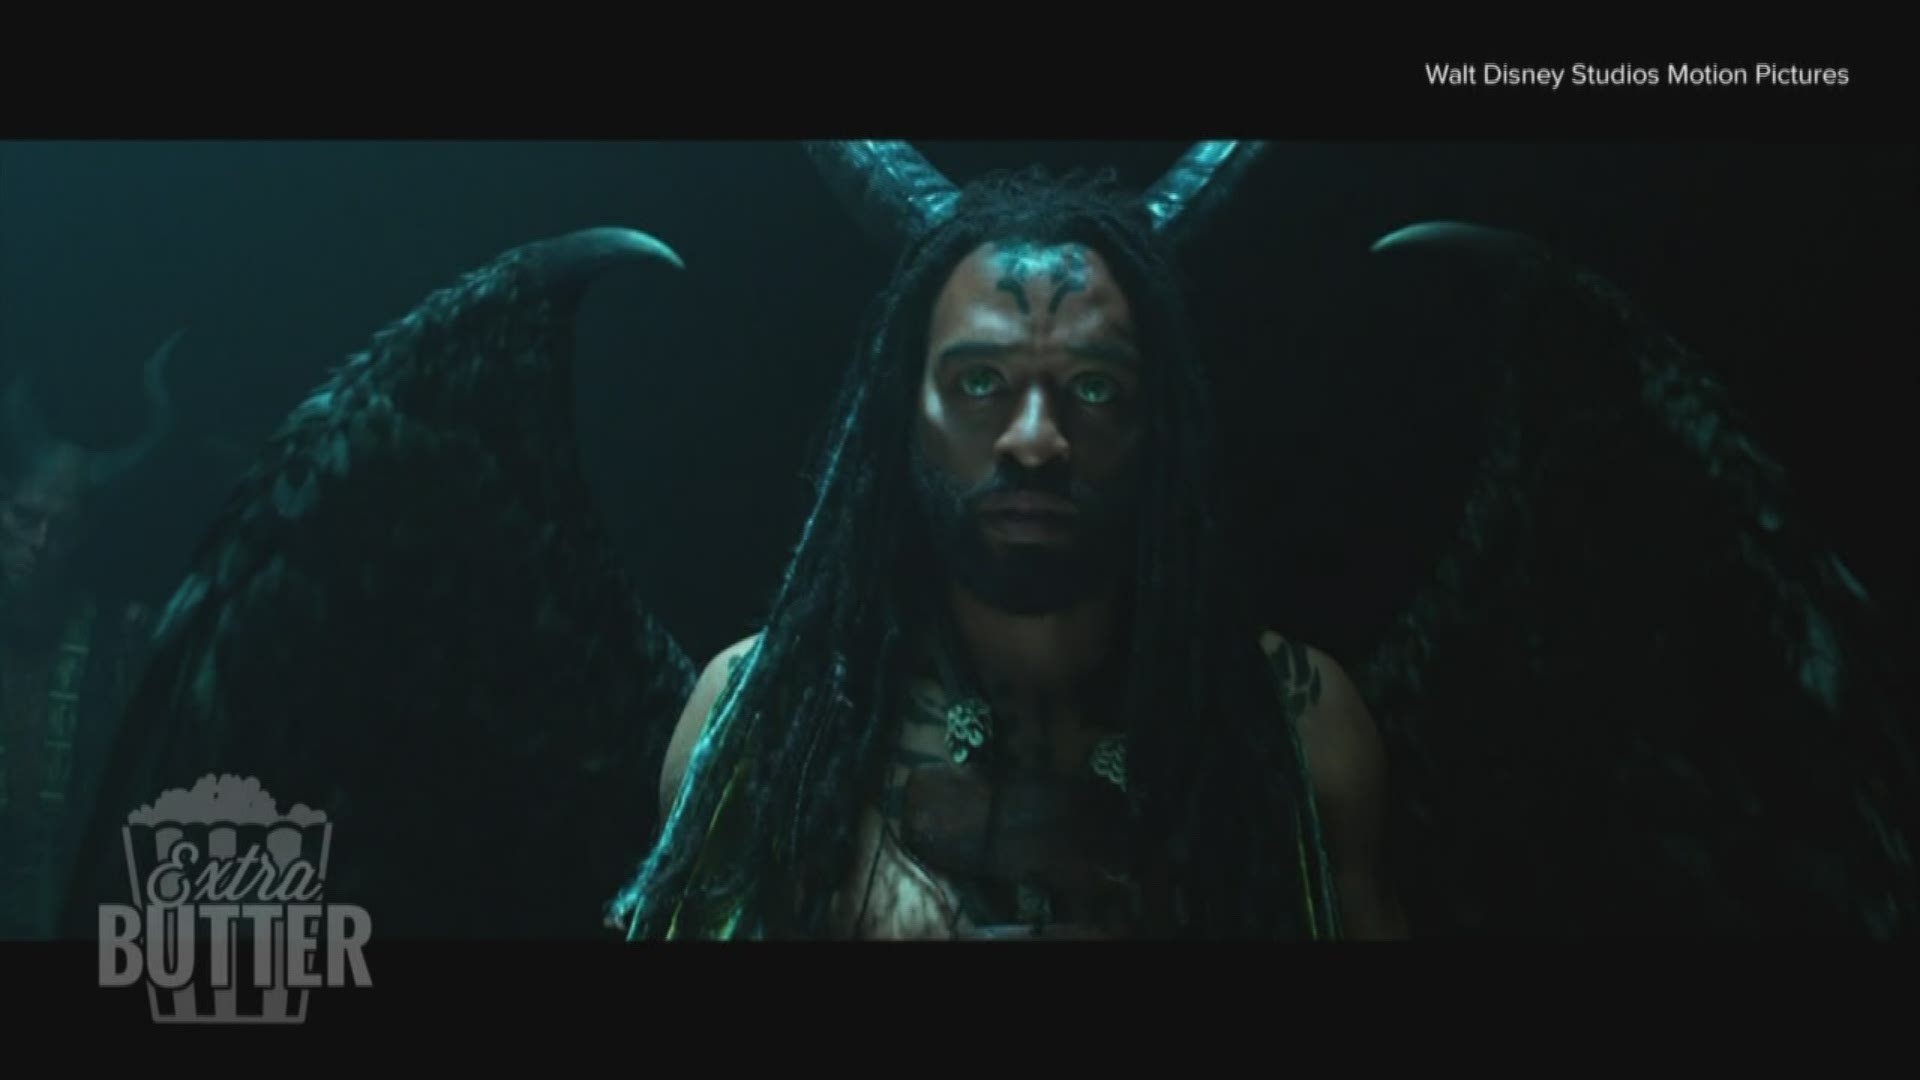 Chiwetel Ejiofor and Ed Skrein talk about their roles in Maleficent: Mistress of Evil.